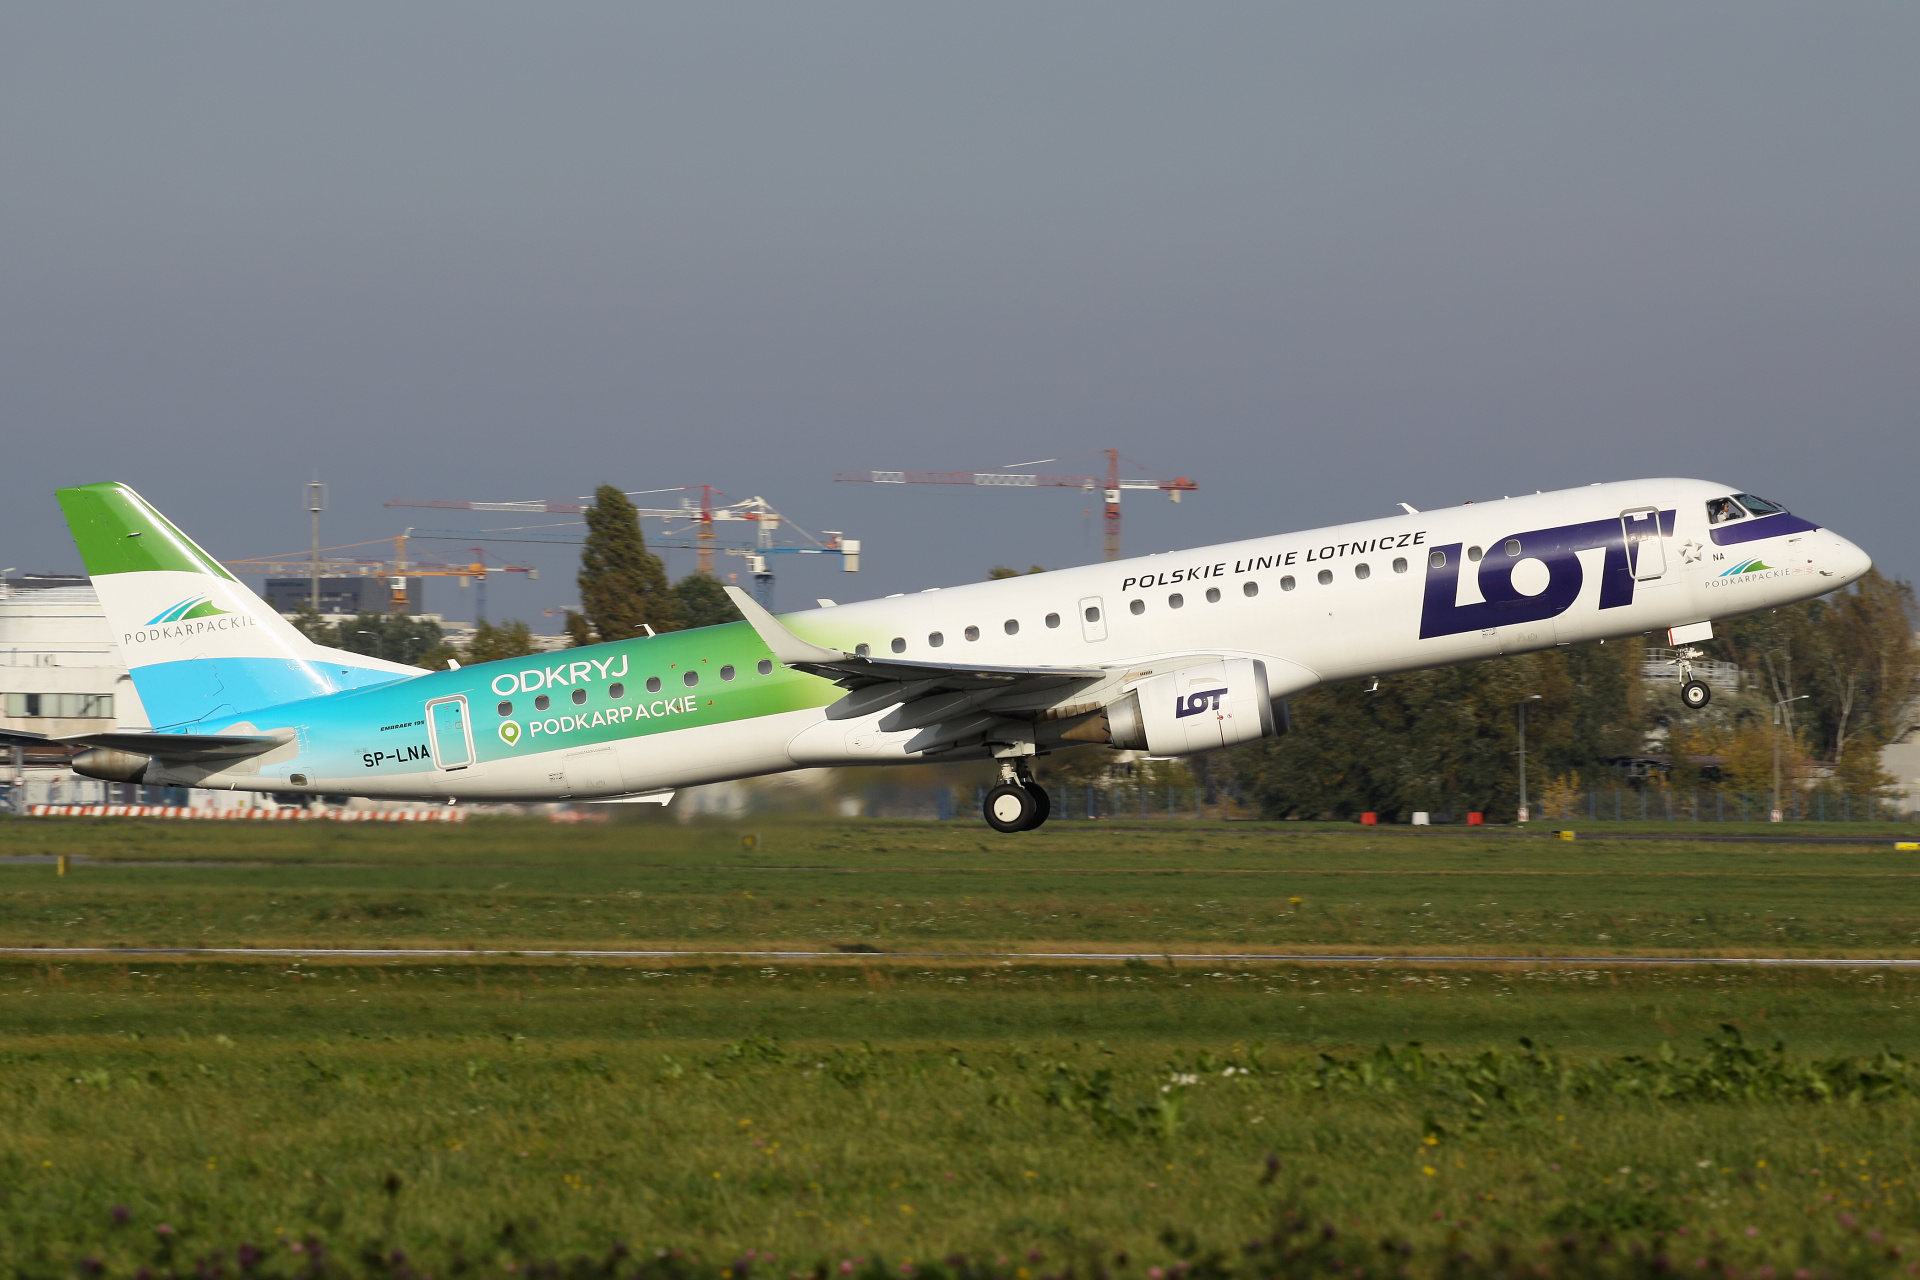 SP-LNA (Discover Podkarpackie livery) (Aircraft » EPWA Spotting » Embraer E195 » LOT Polish Airlines)